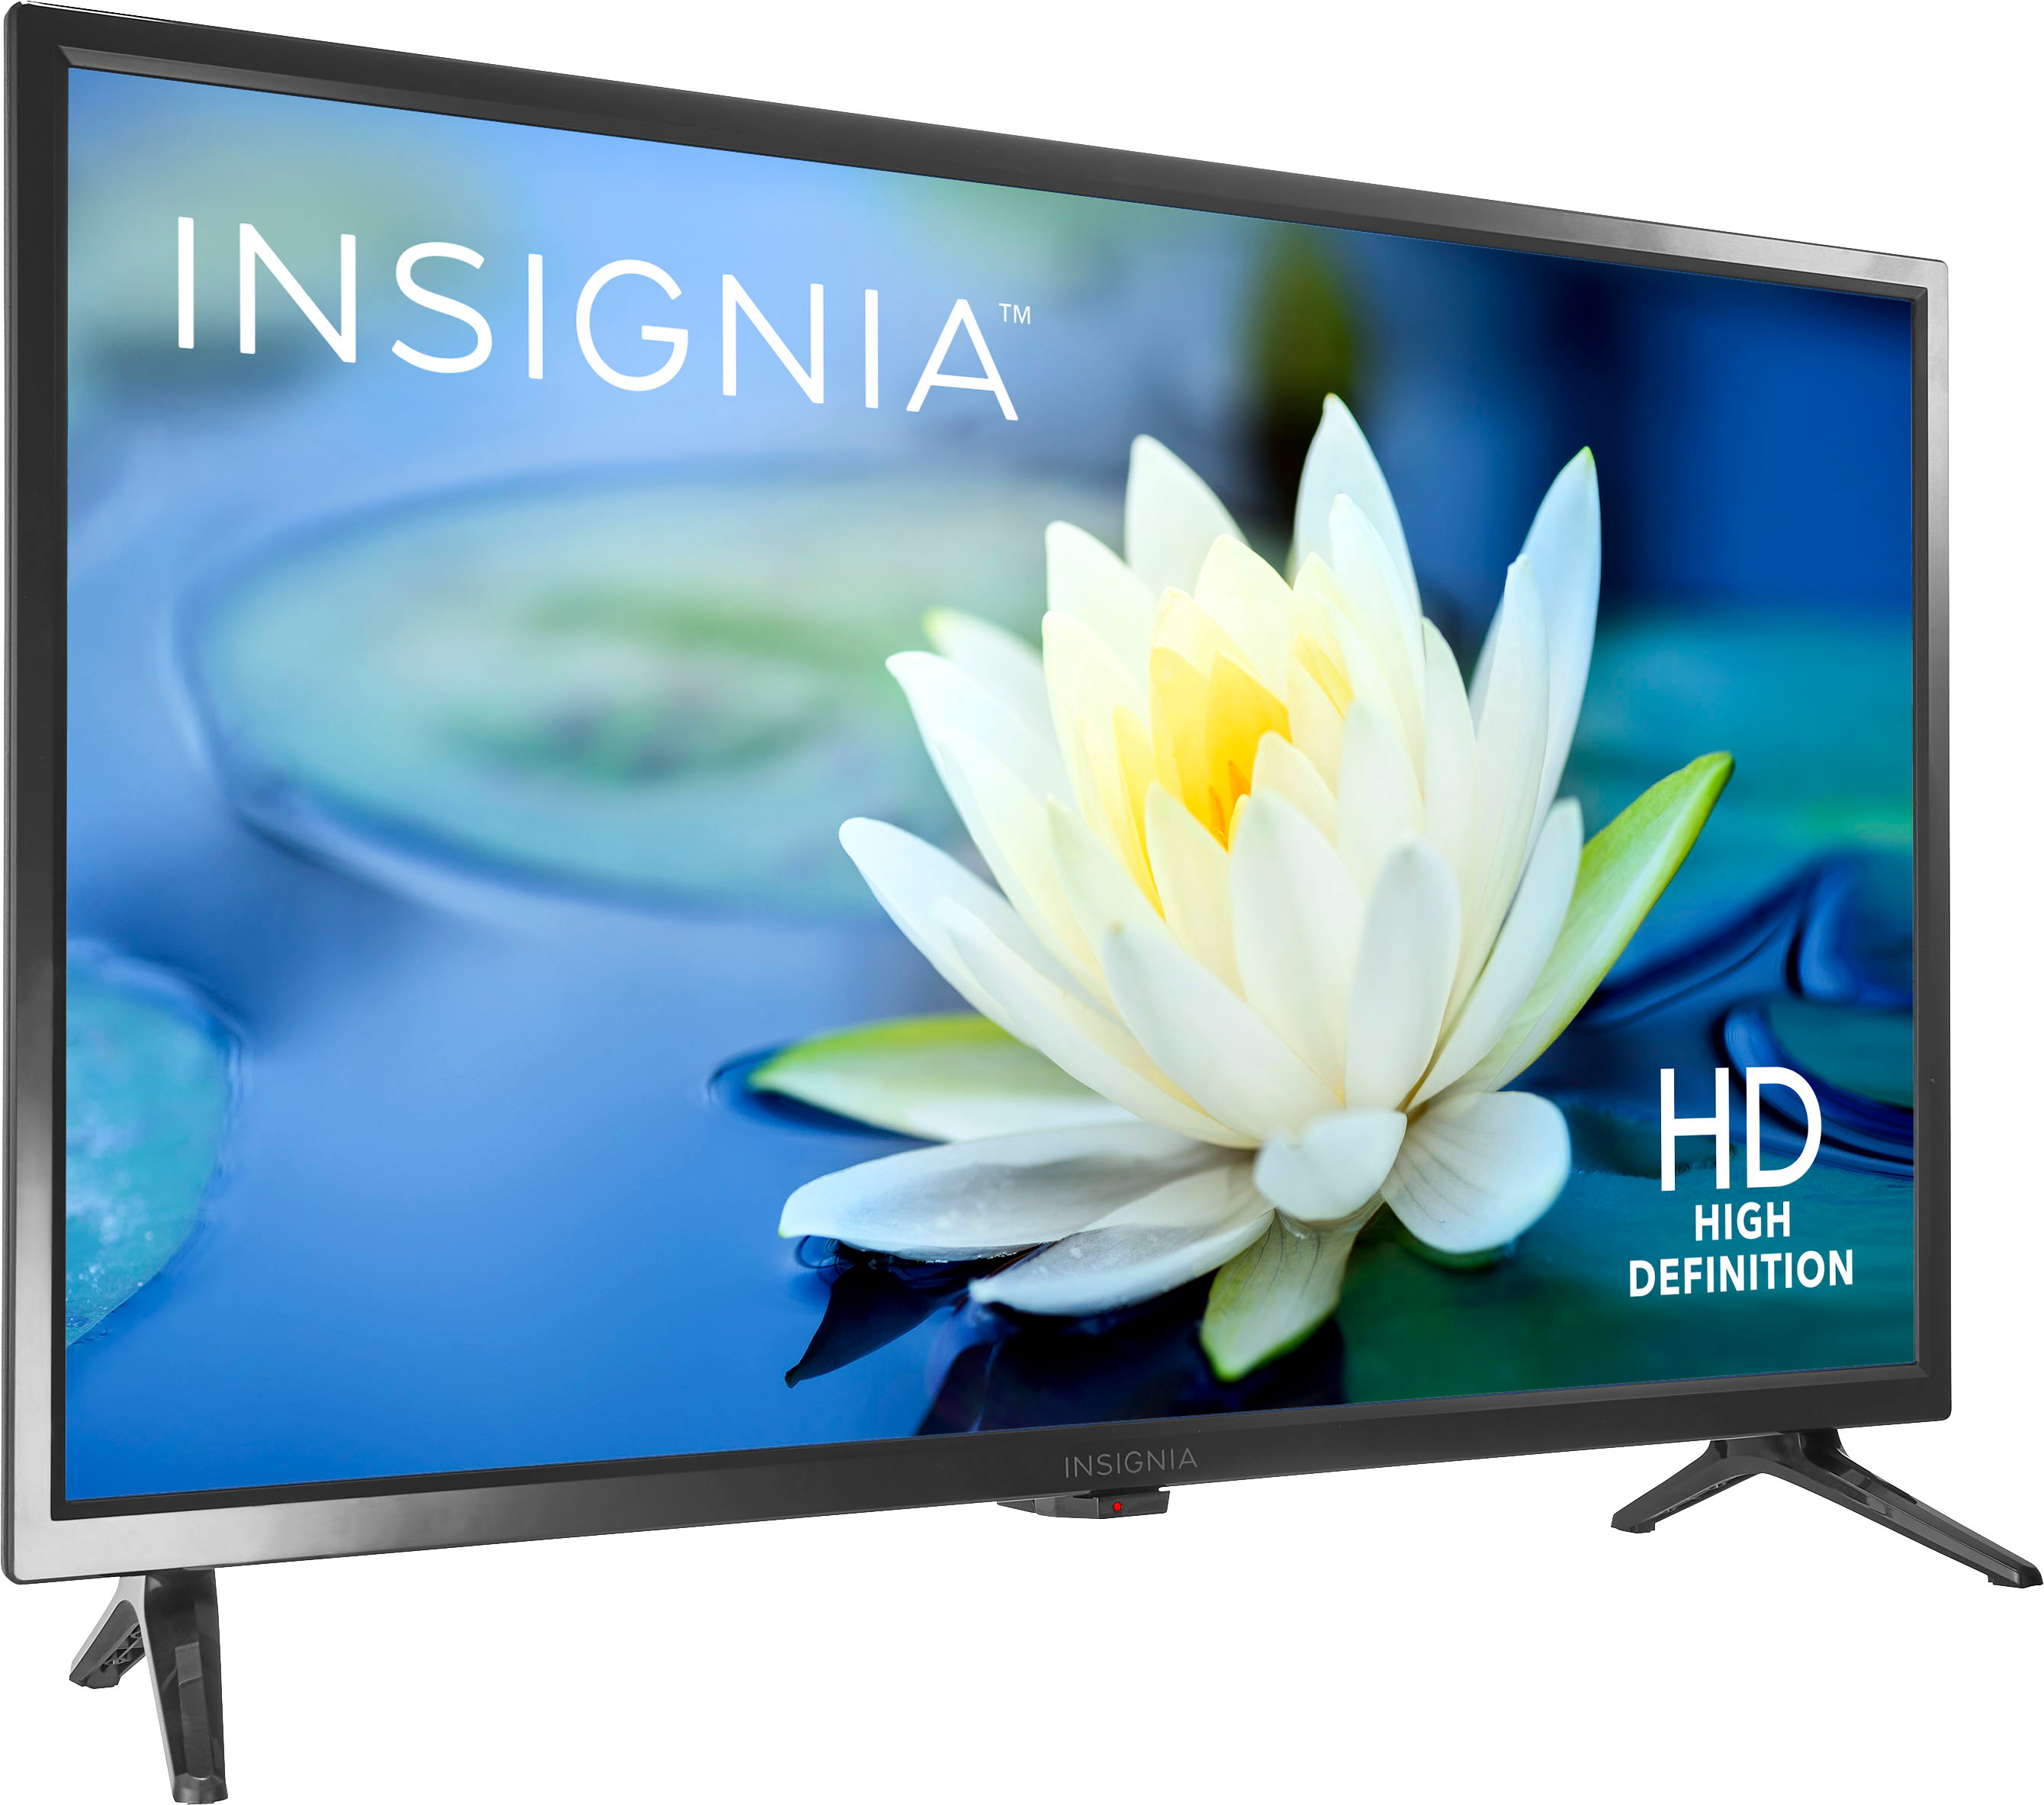 Angle View: Insignia™ - 24" Class N10 Series LED HD TV